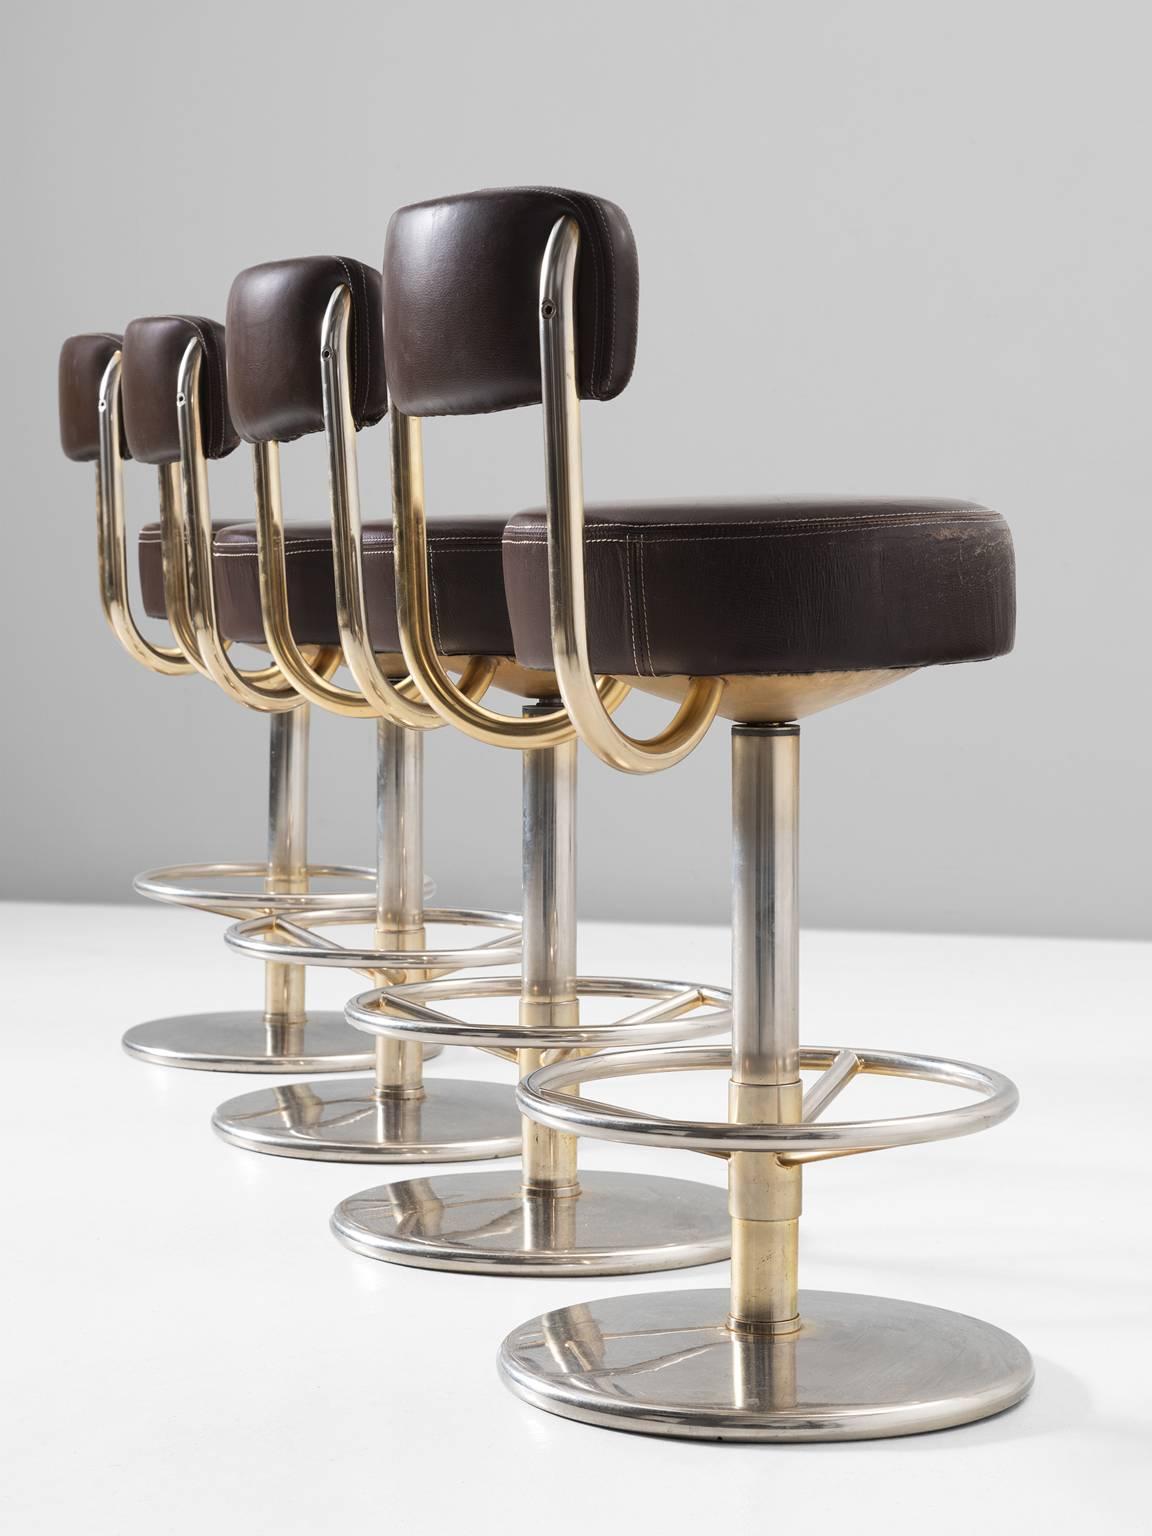 Hollywood Regency Set of Four Bar Stools in Brass Colored Metal and Brown Leather Upholstery